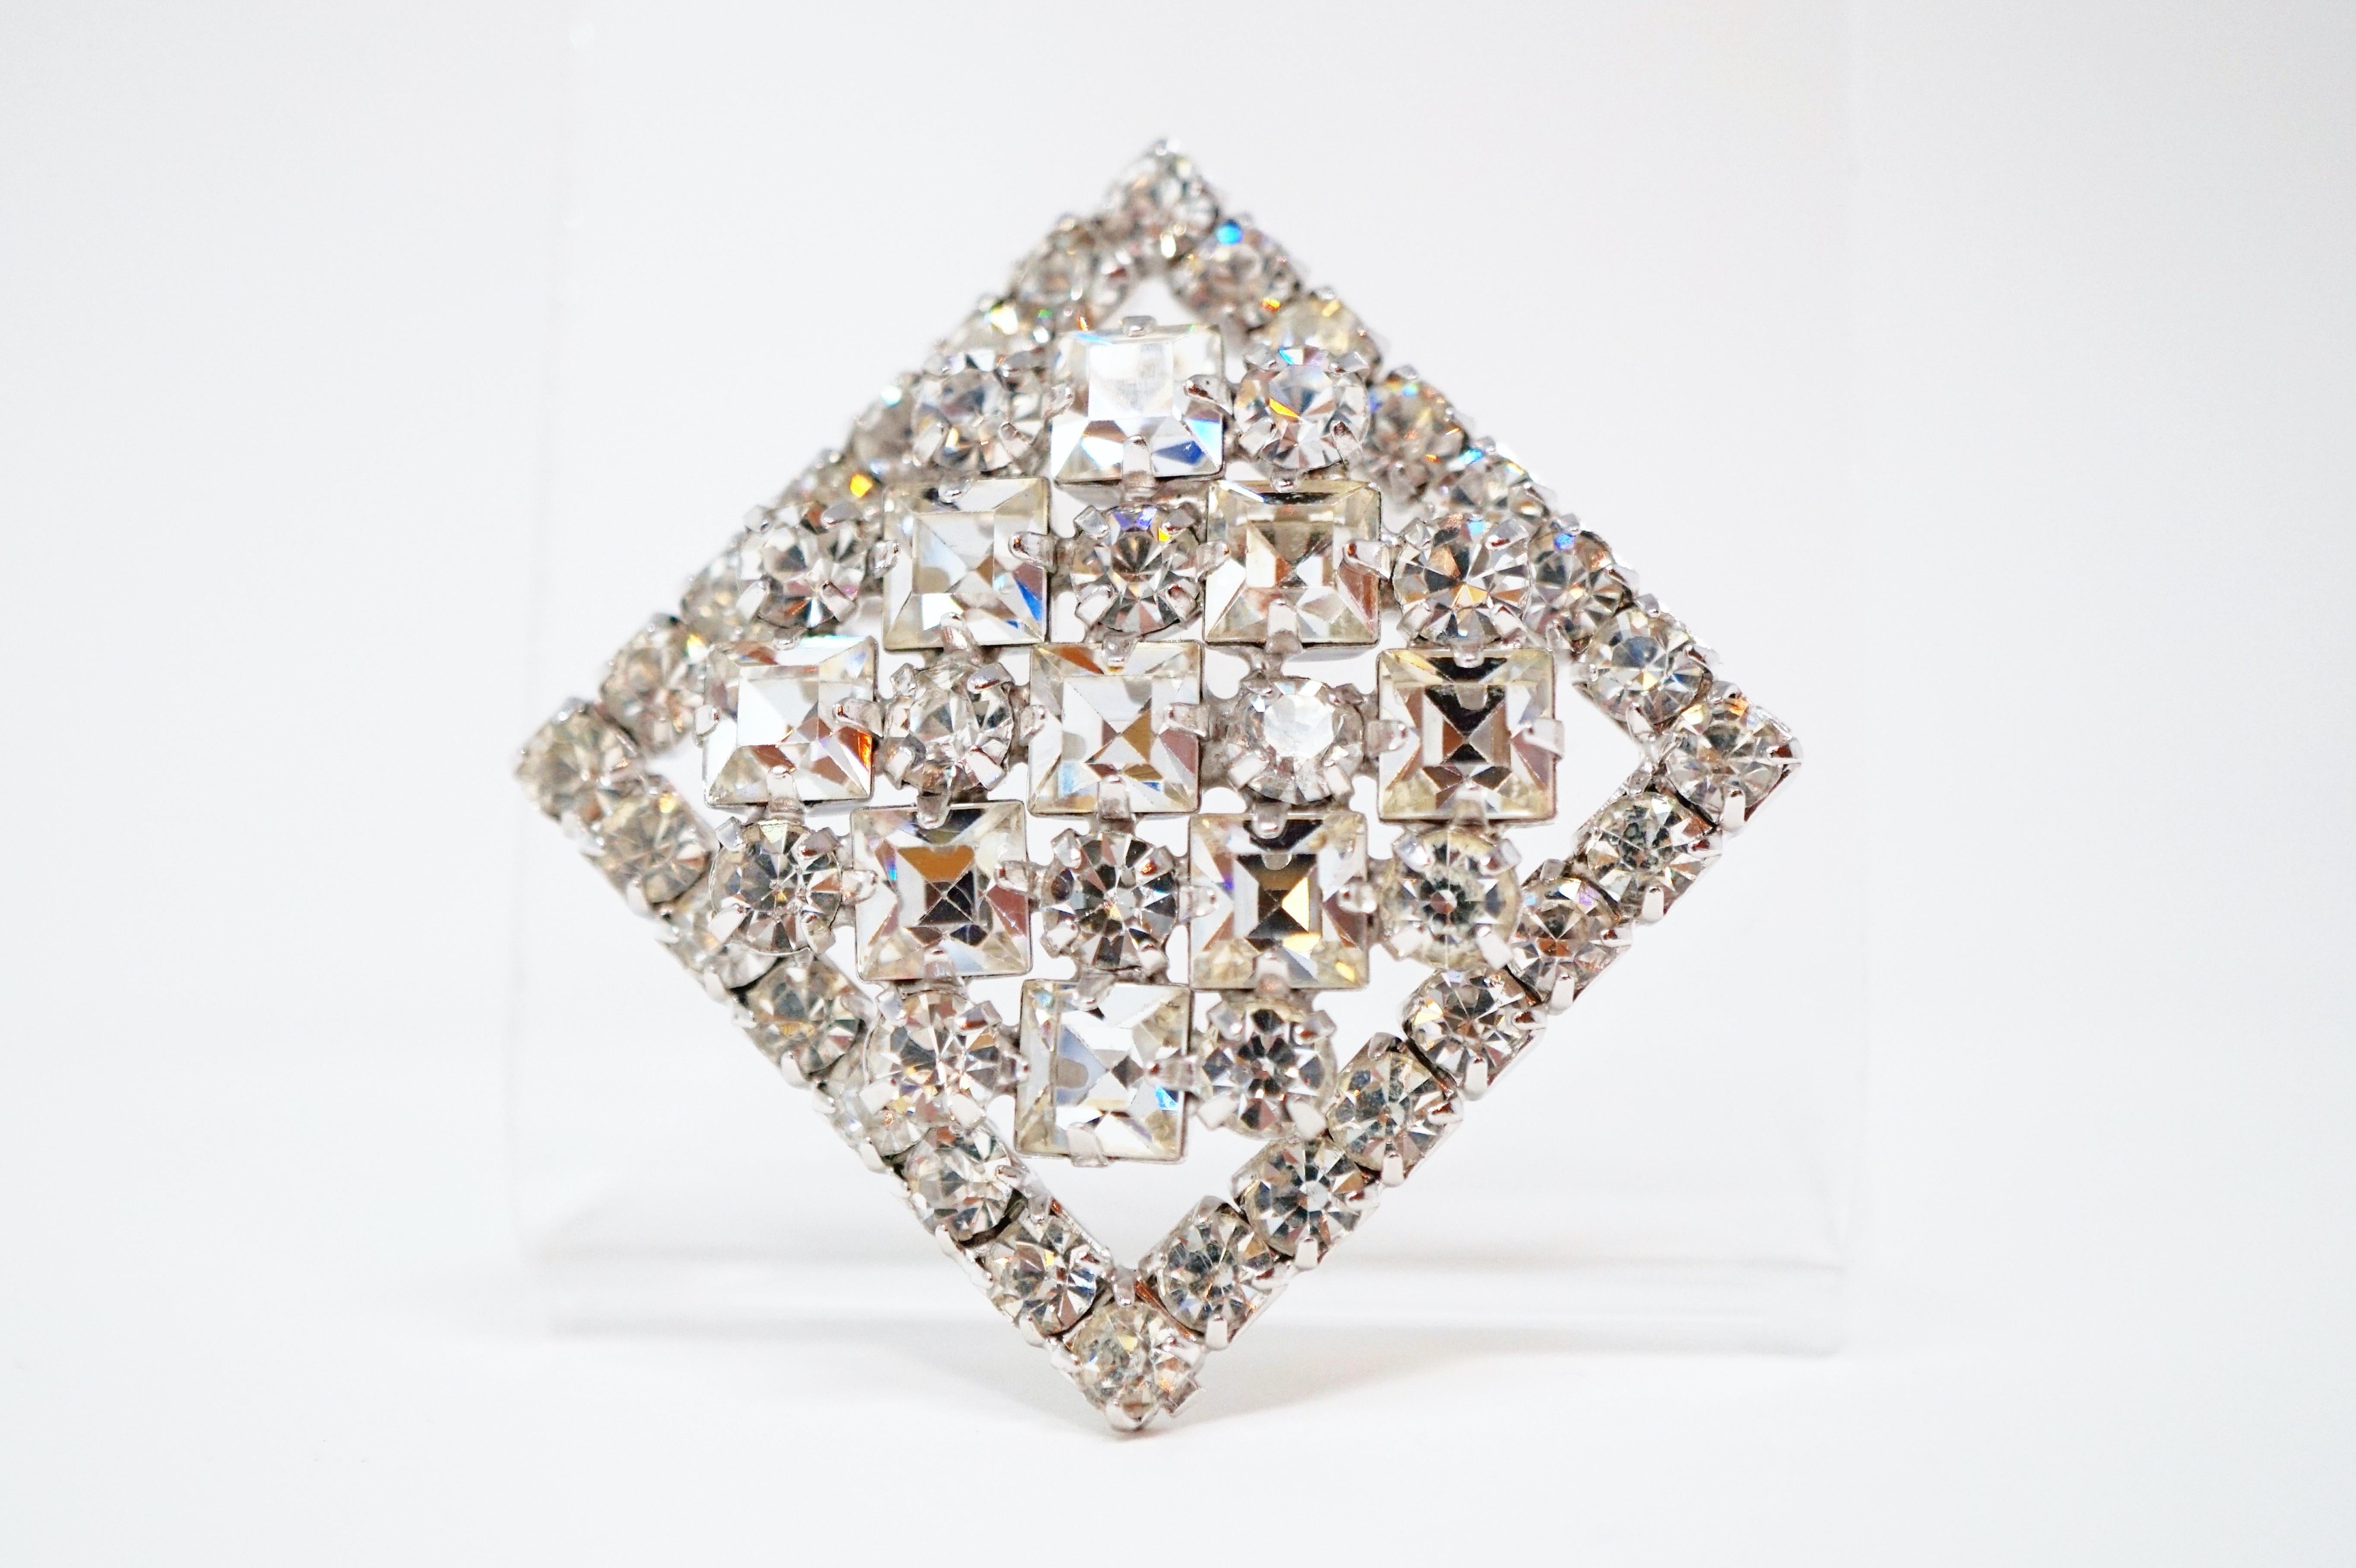 Vintage Faceted Crystal Rhinestone Brooch by Weiss, Signed, circa 1952 4